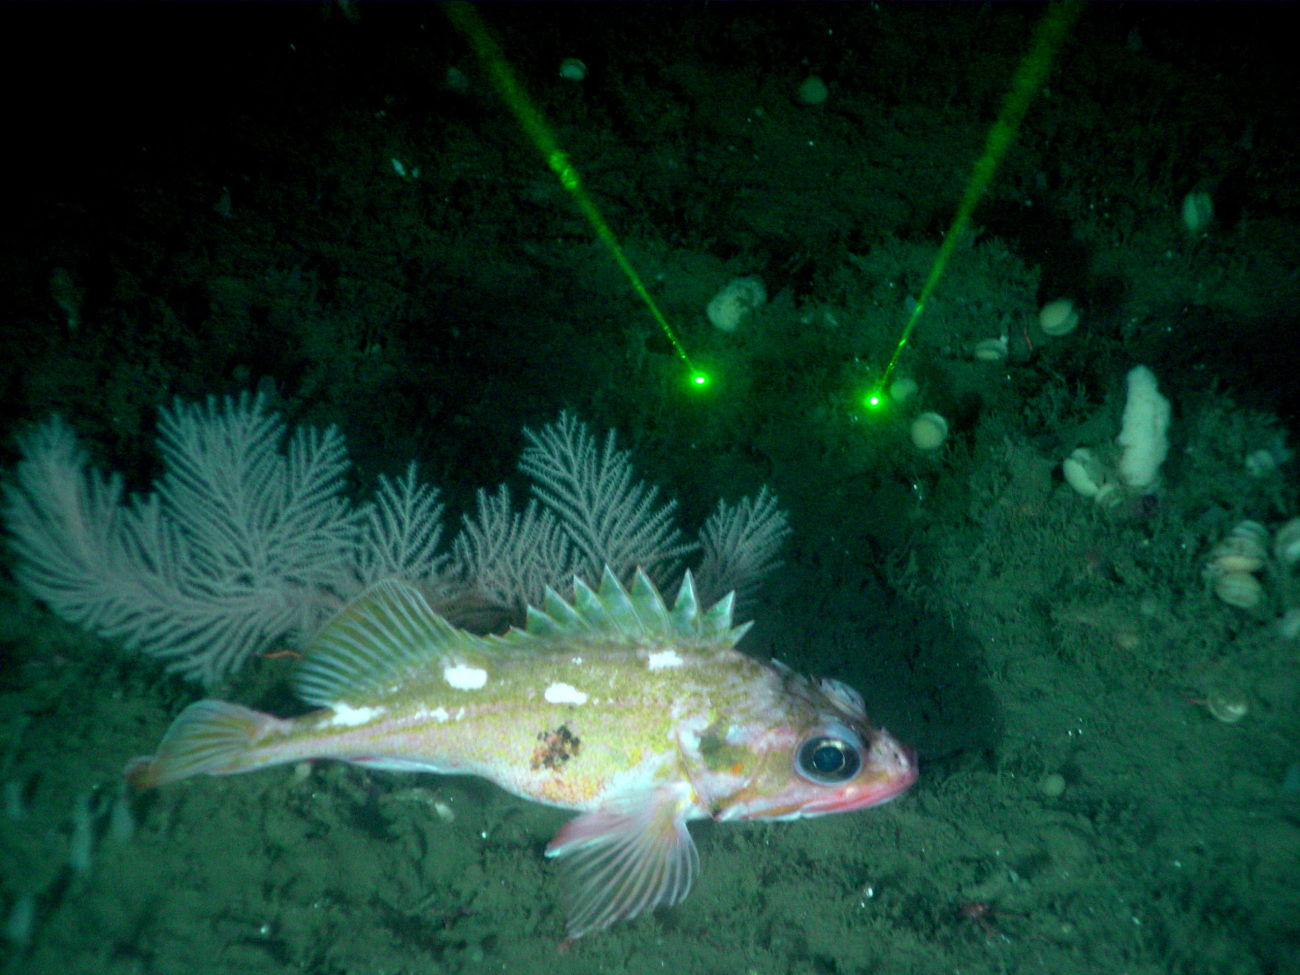 Rockfish - green laser dots are ten centimeters apart for scale